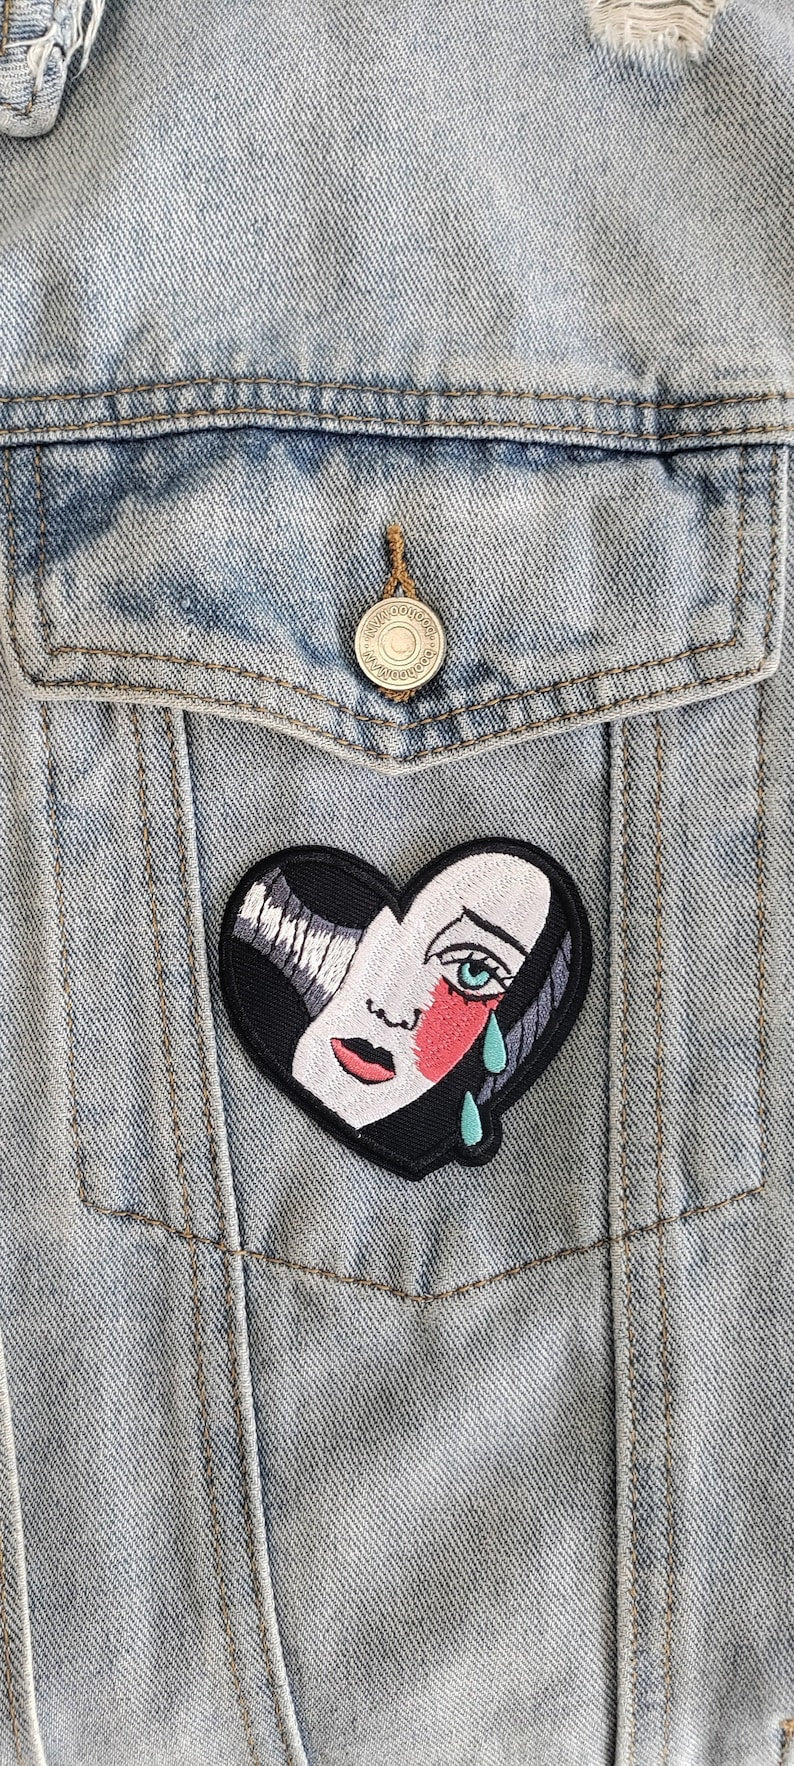 Cry Me A River // Heart DIY Embroidered Iron Sew On Patch Woman Crying Pop Art Trad Tattoo Style Aesthetic Goth Applique Craft Motif Gift x